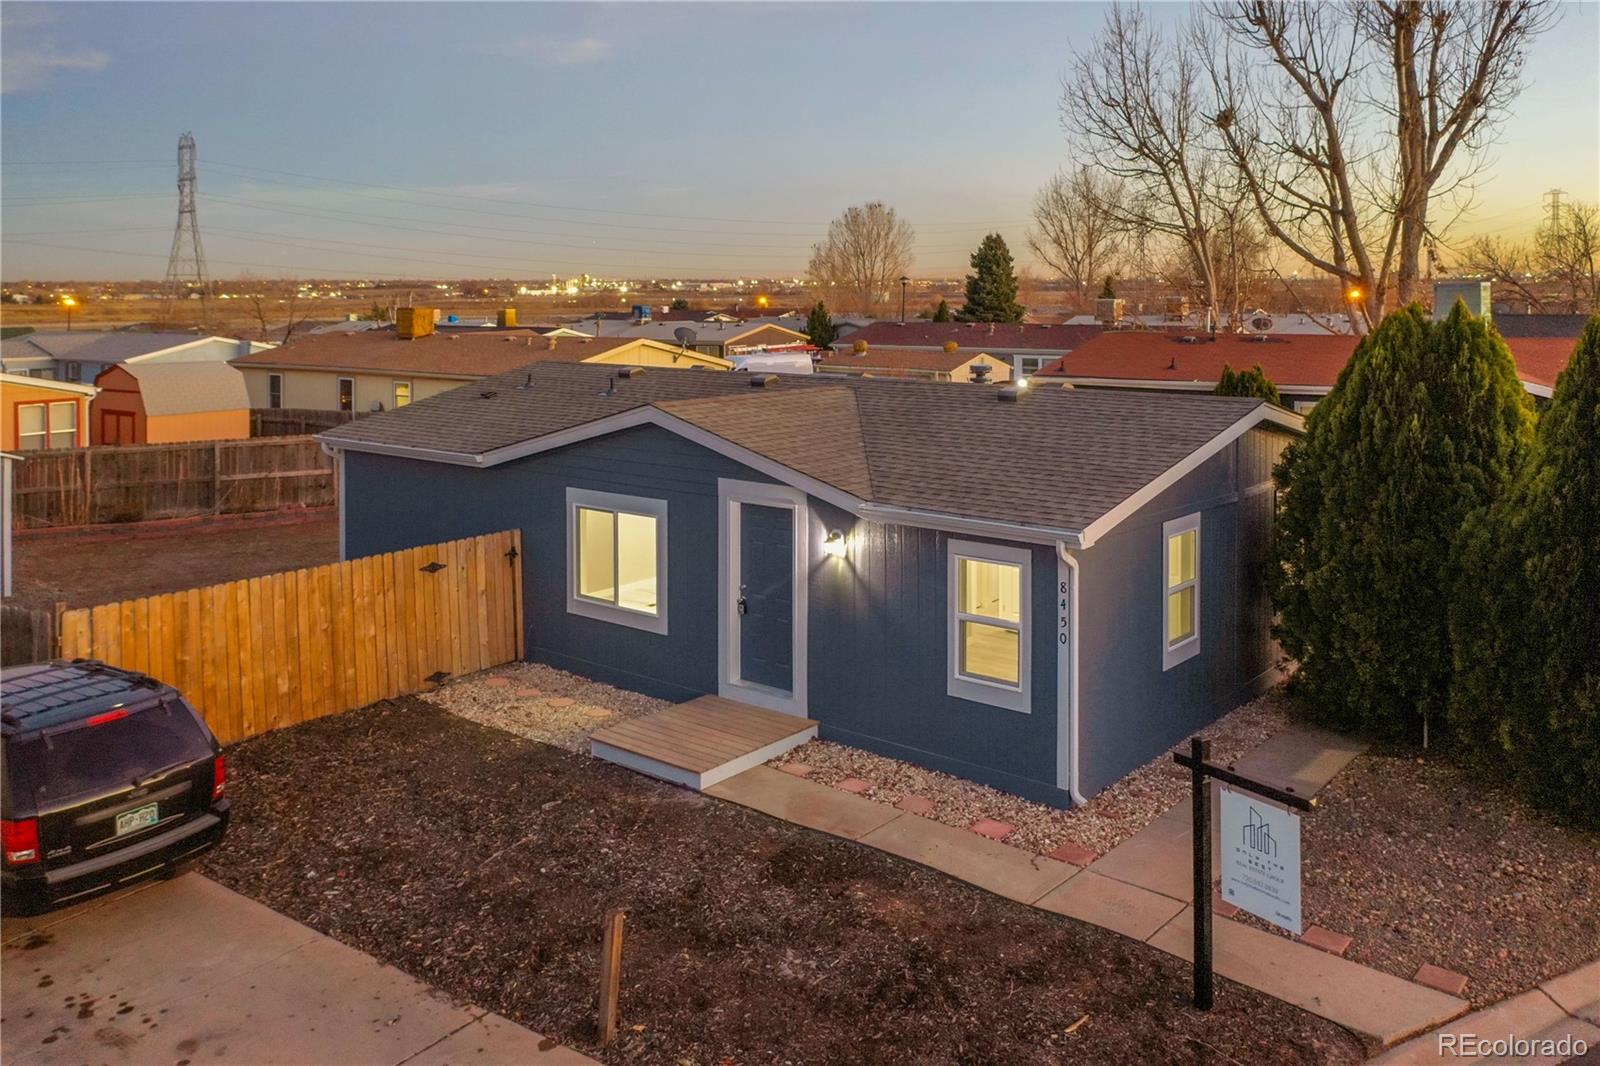 8450  garfield way, Denver sold home. Closed on 2024-02-16 for $380,000.